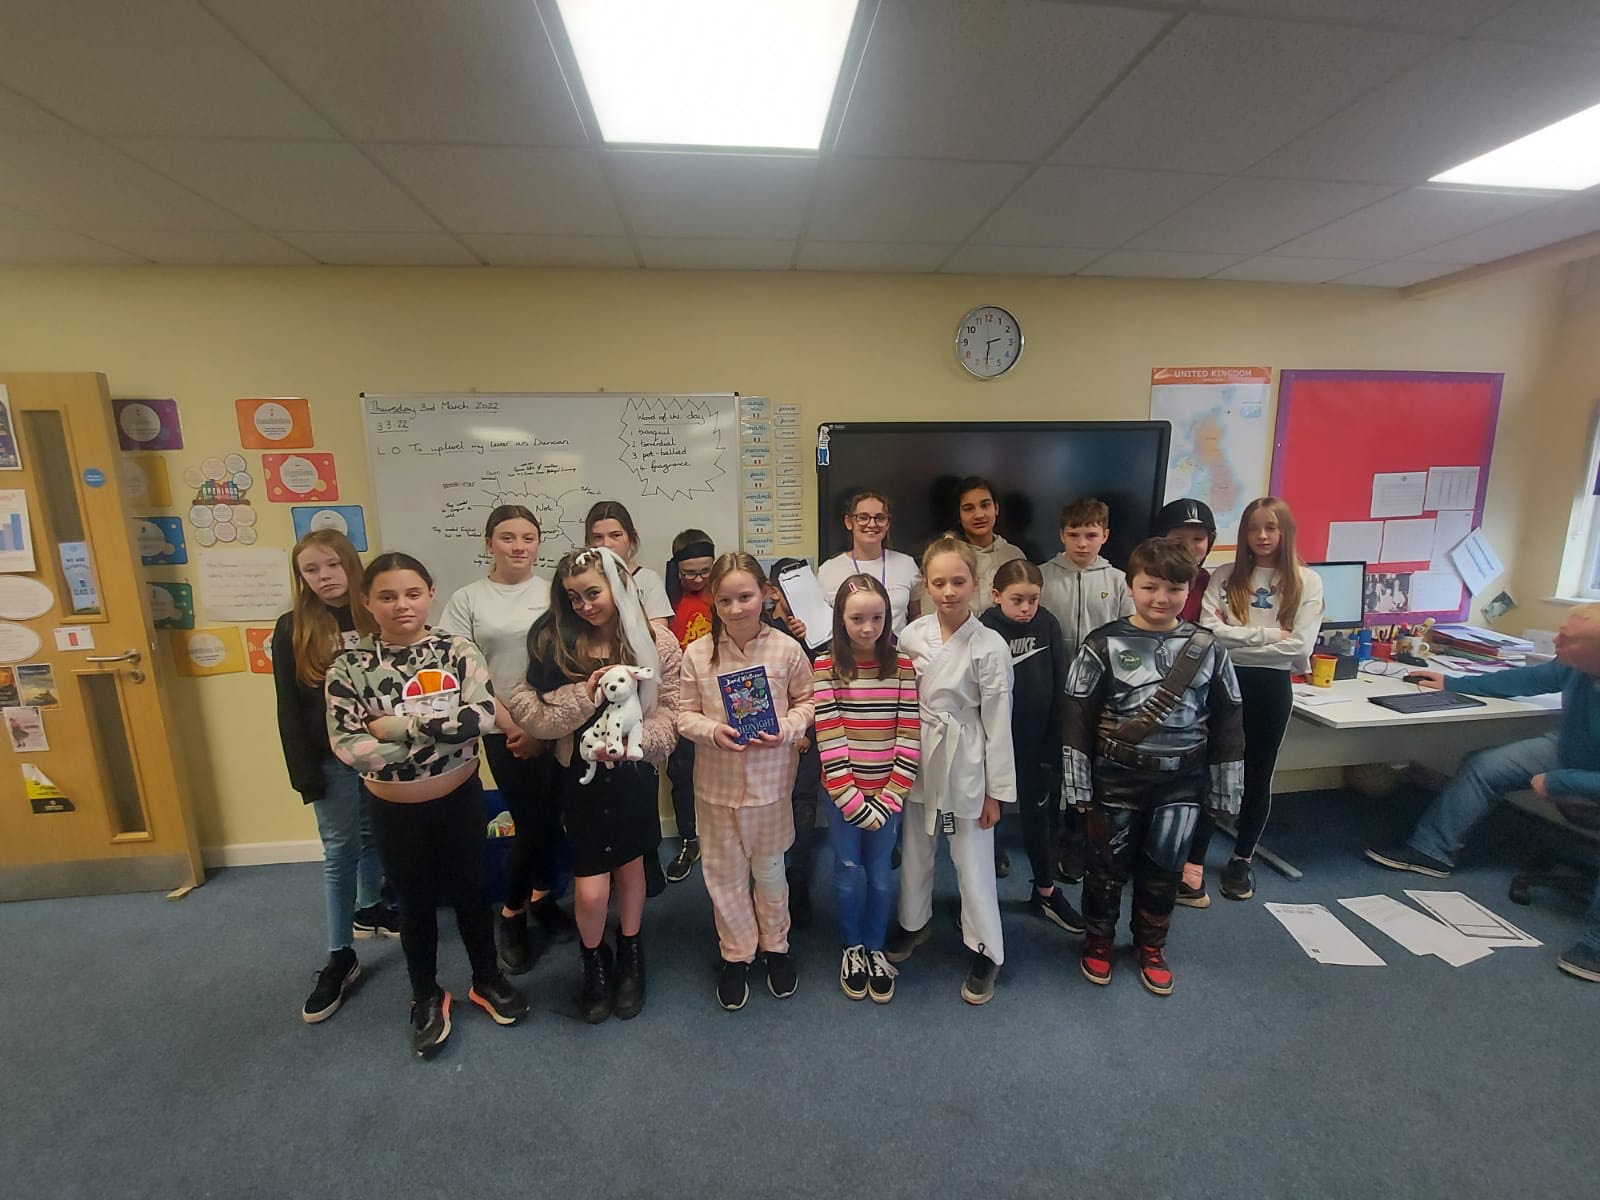 Year 6 children dressed up for World Book Day